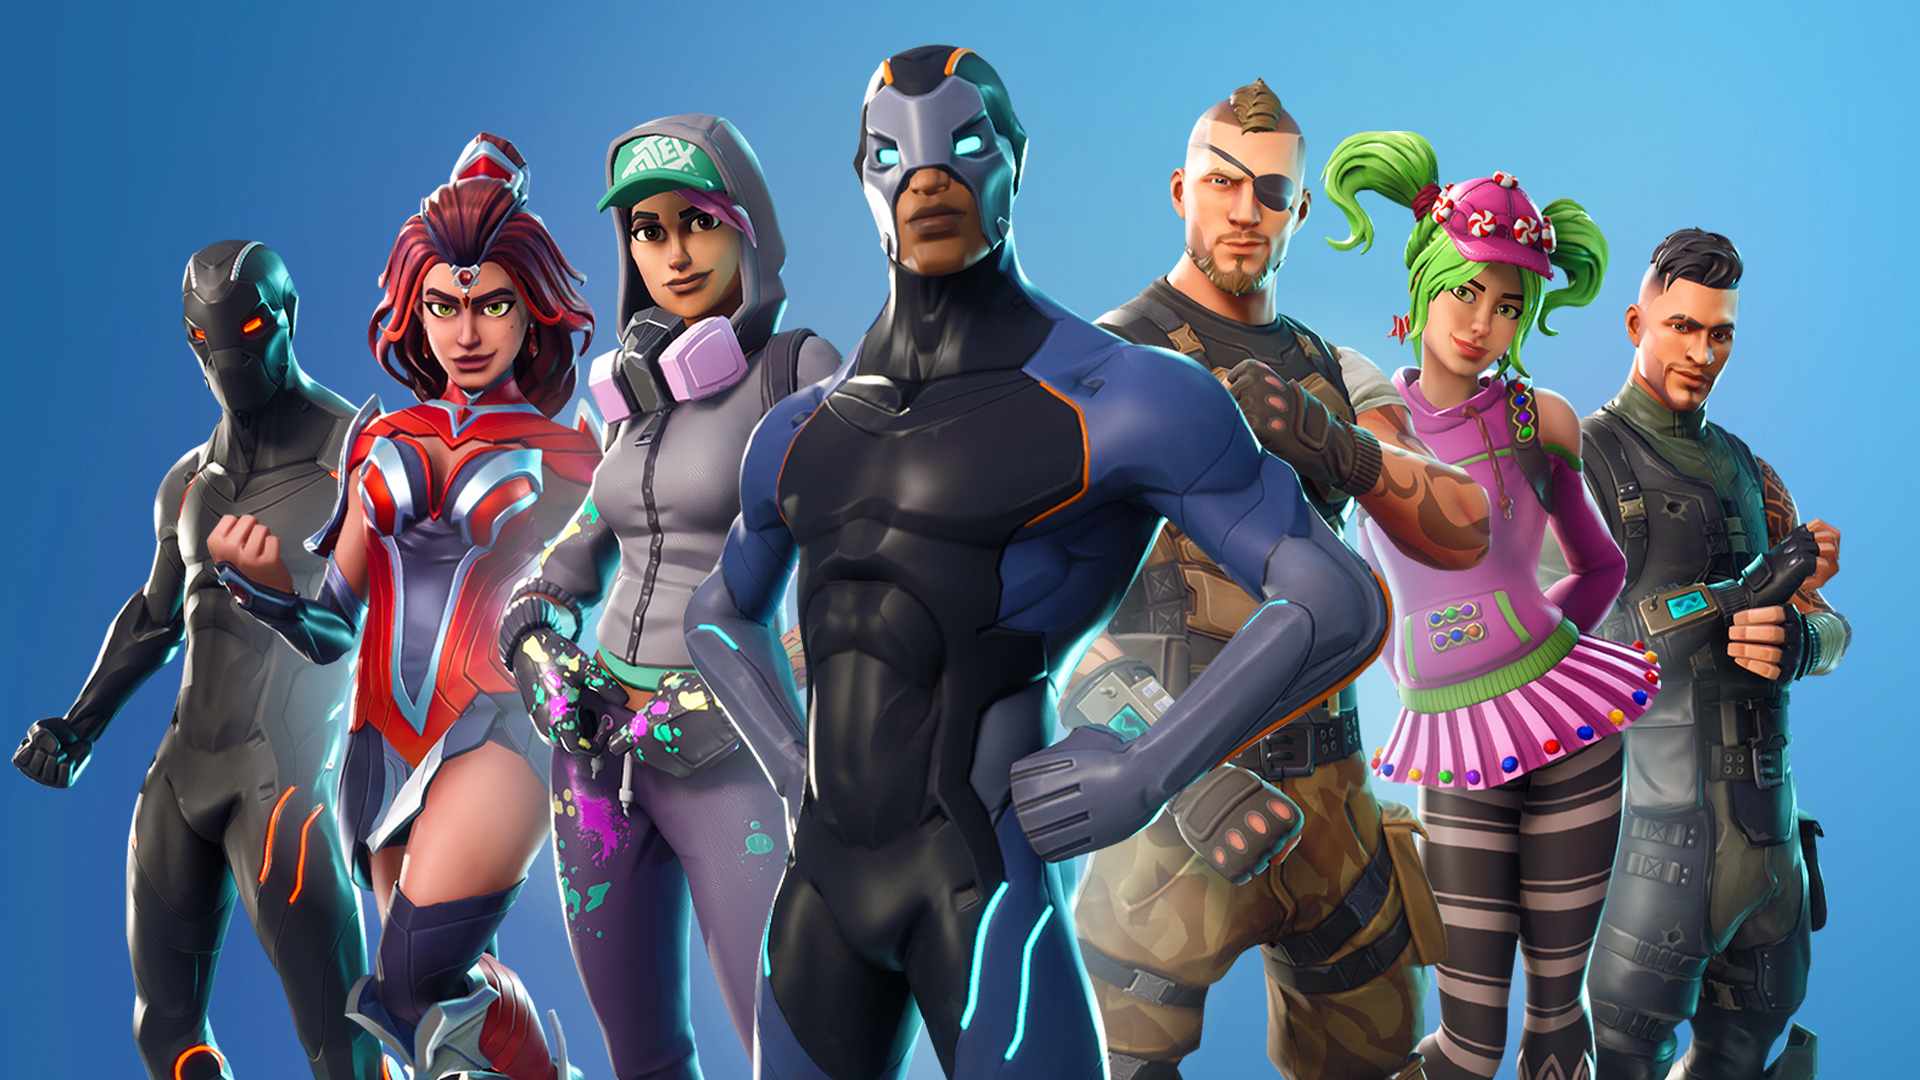 Poll: 'Fortnite' Players Spend An Average Of Nearly $85 On